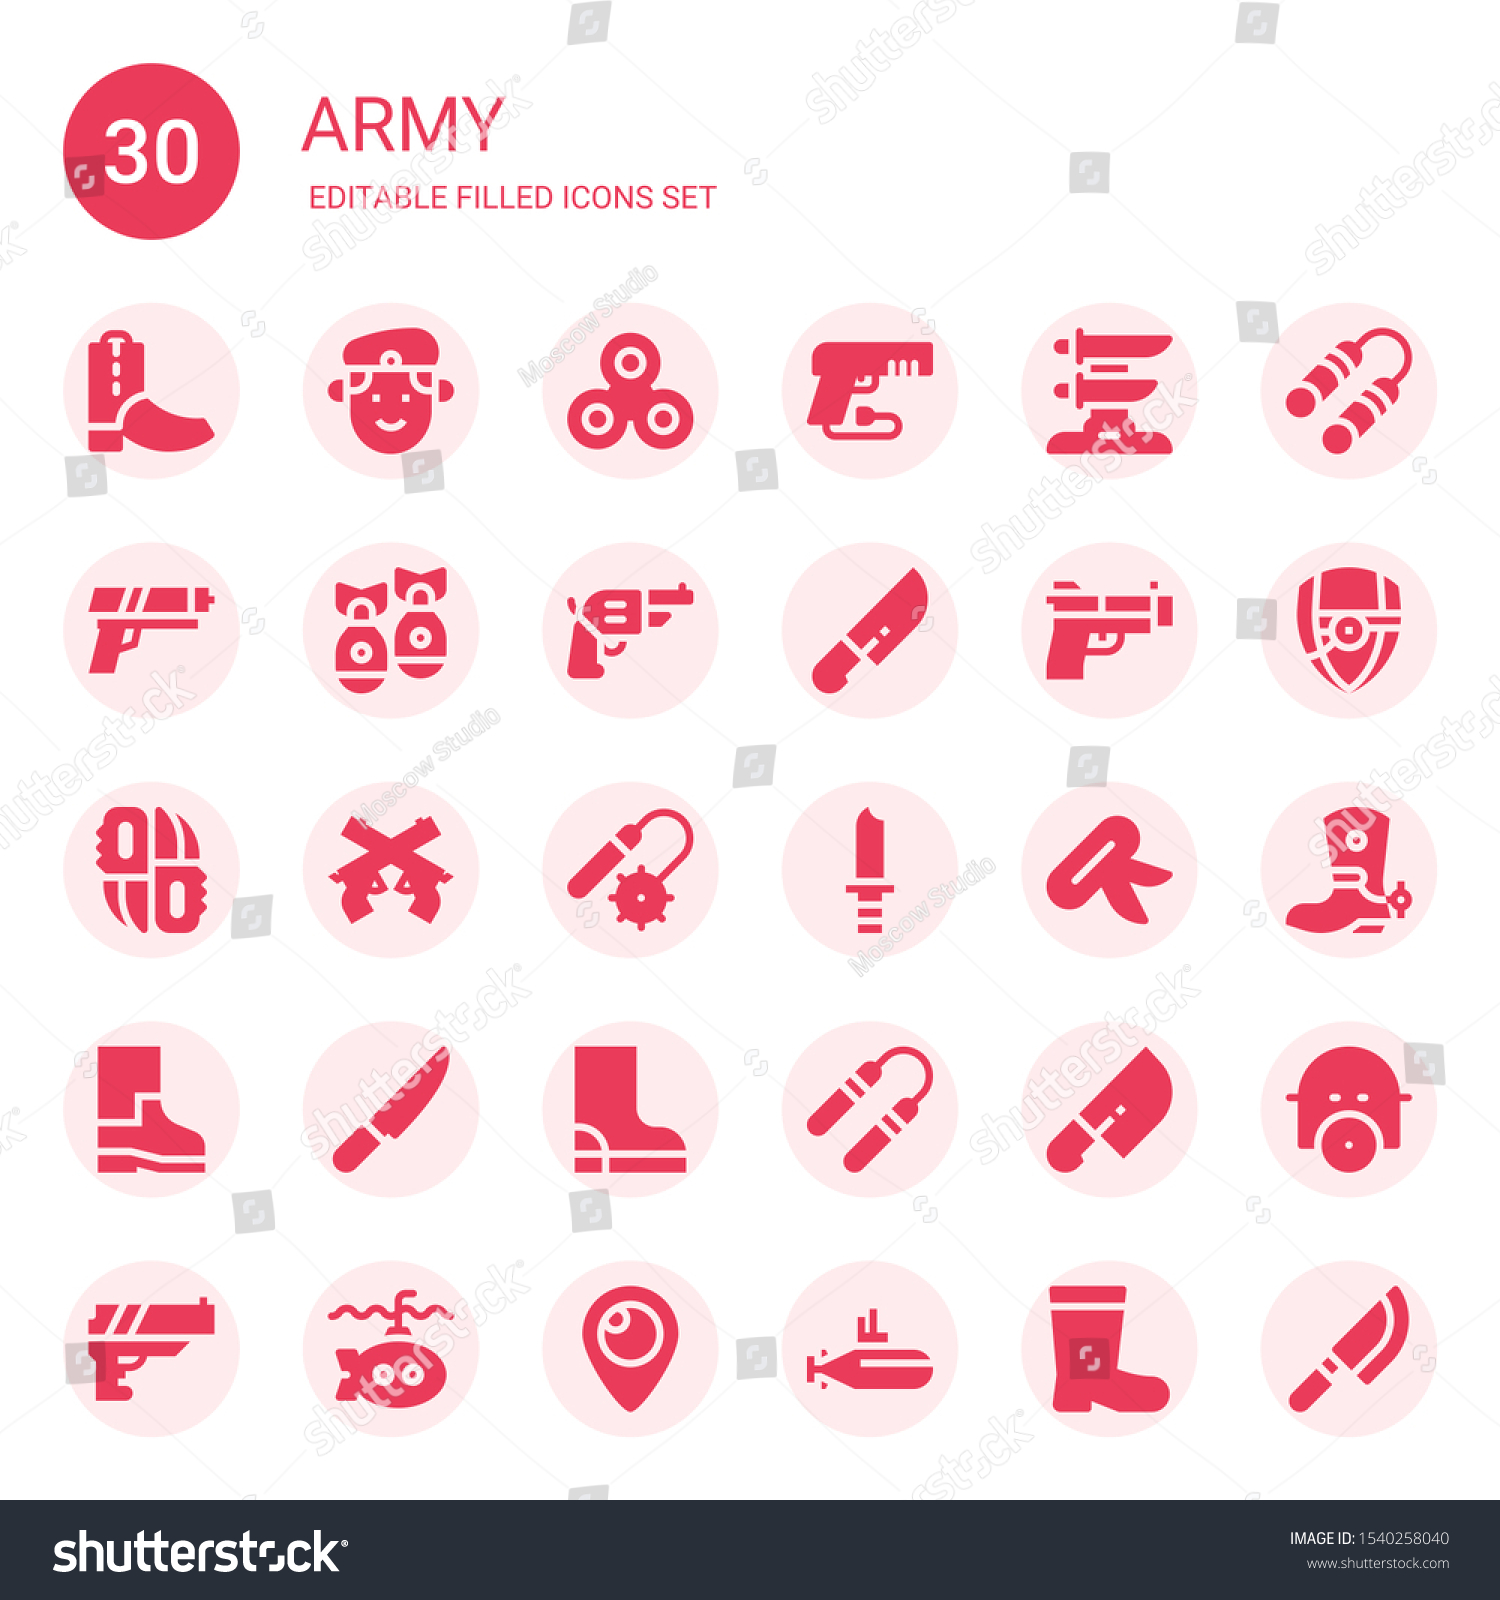 Army Icon Set Collection 30 Filled Stock Vector Royalty Free 1540258040